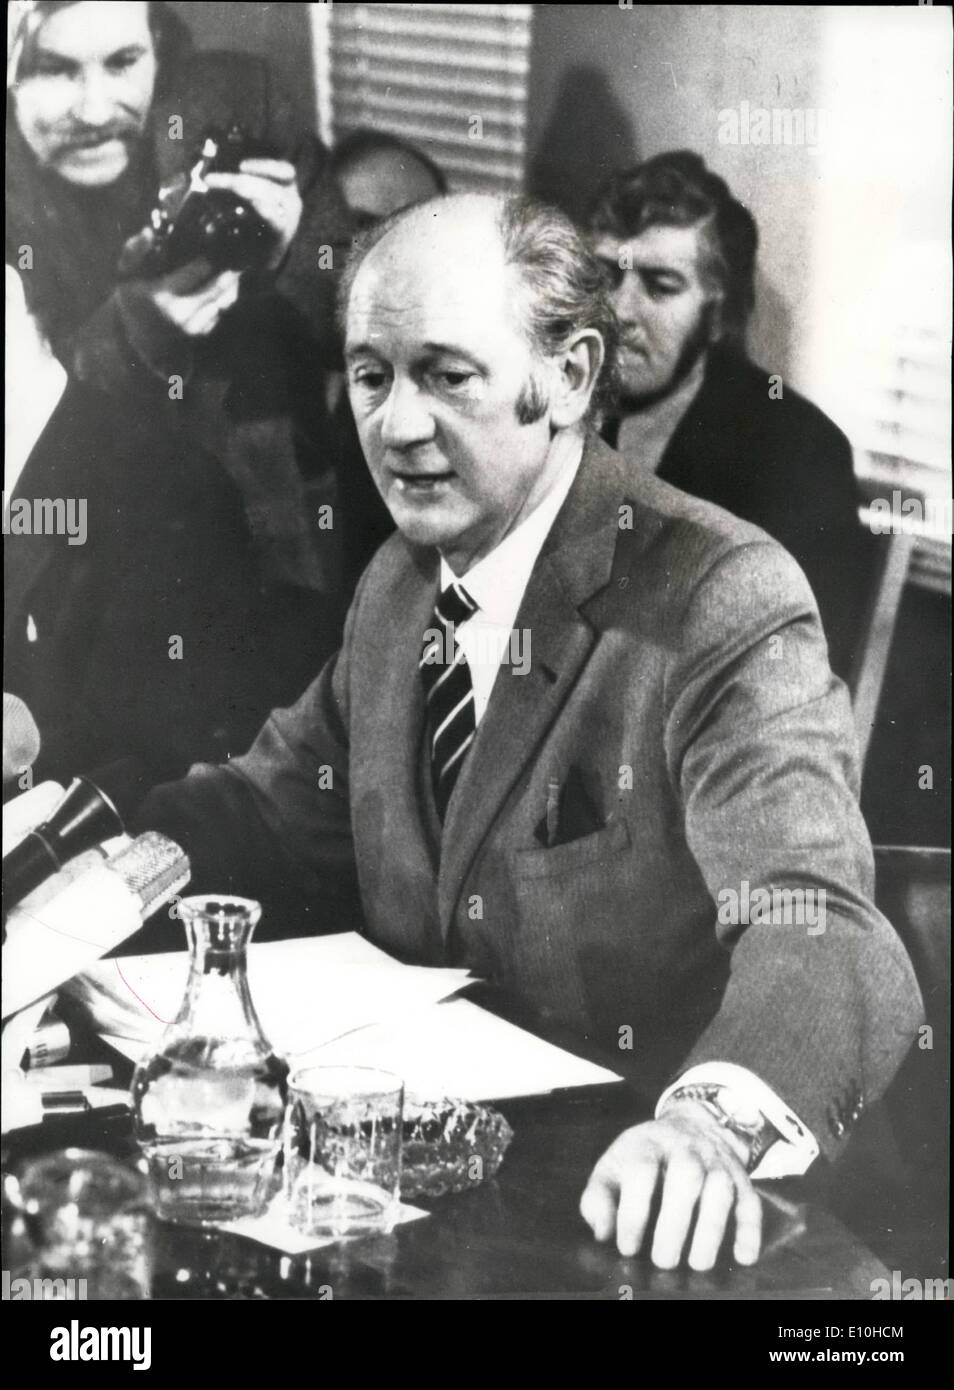 Feb. 02, 1973 - Eire General Election: Polling takes place tomorrow in the Eire general election. Photo shows Mr. Jack Lynch, the Eire Prime Minister, pictured during today's Press Conference in Dublin. Stock Photo